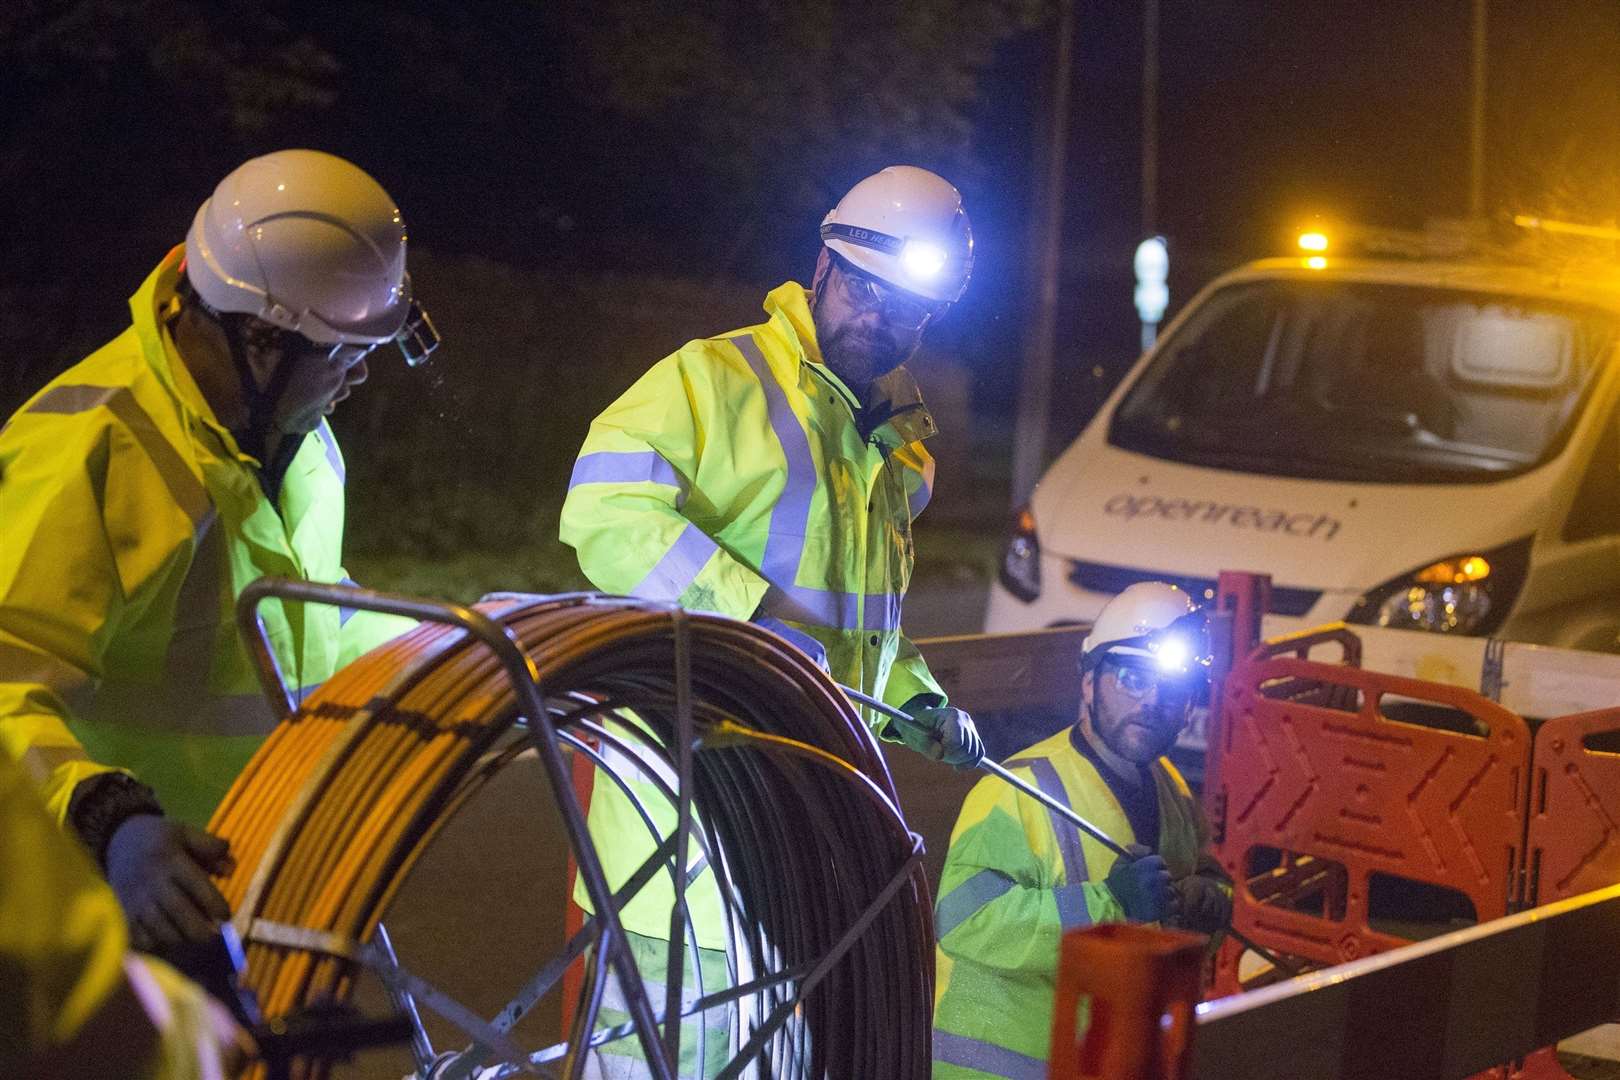 Openreach was awarded the contract for the North Lot after a delay.